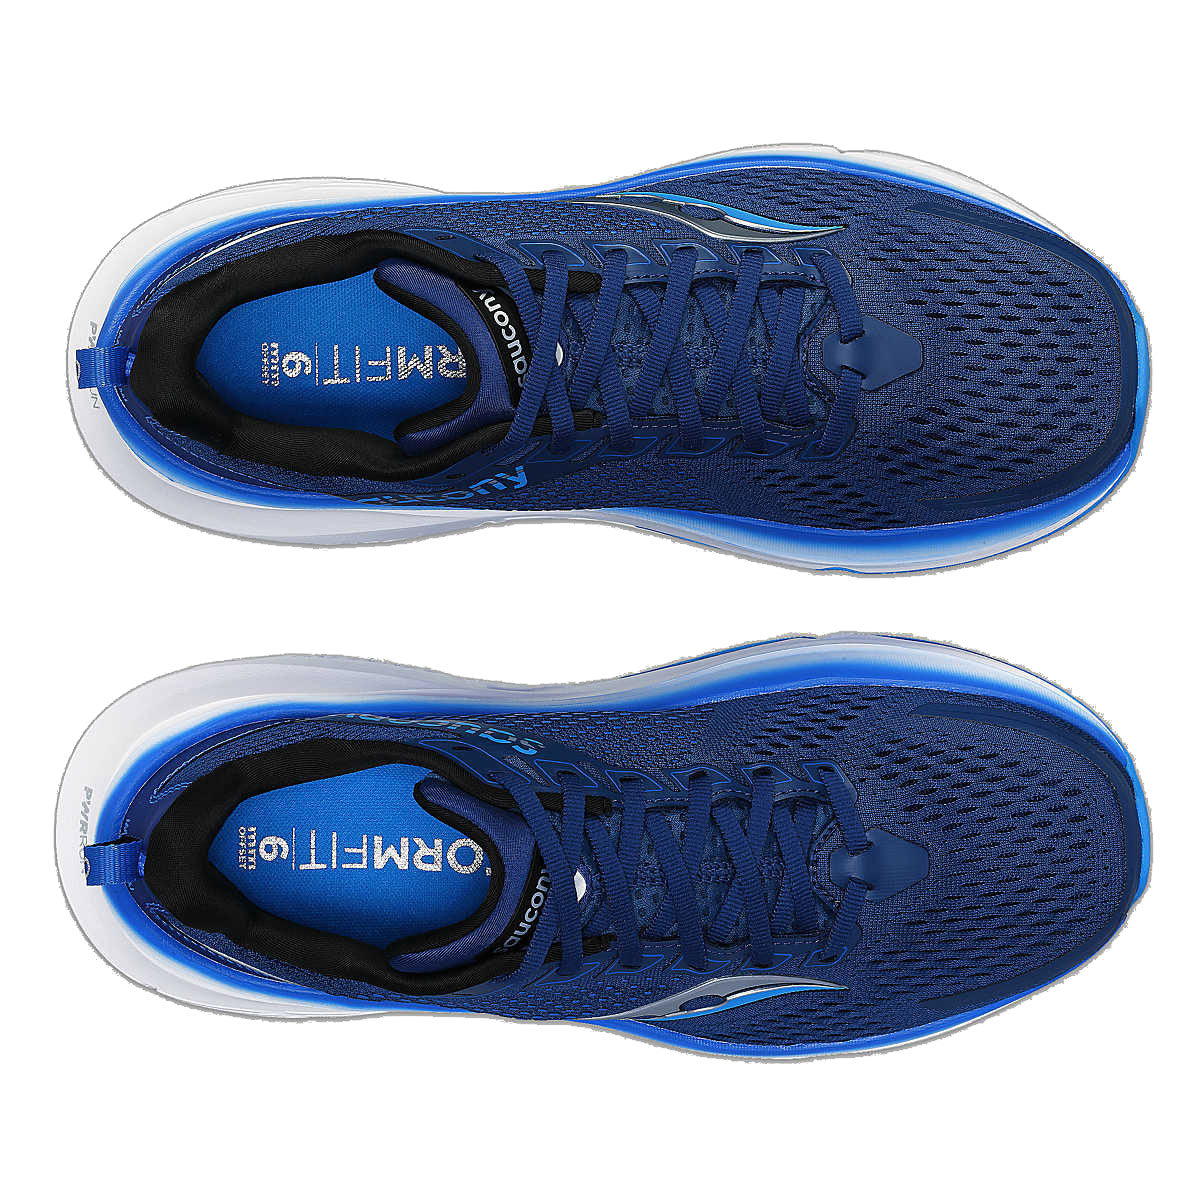 Saucony Guide 17 Running Shoes - Mens - Navy/Cobalt